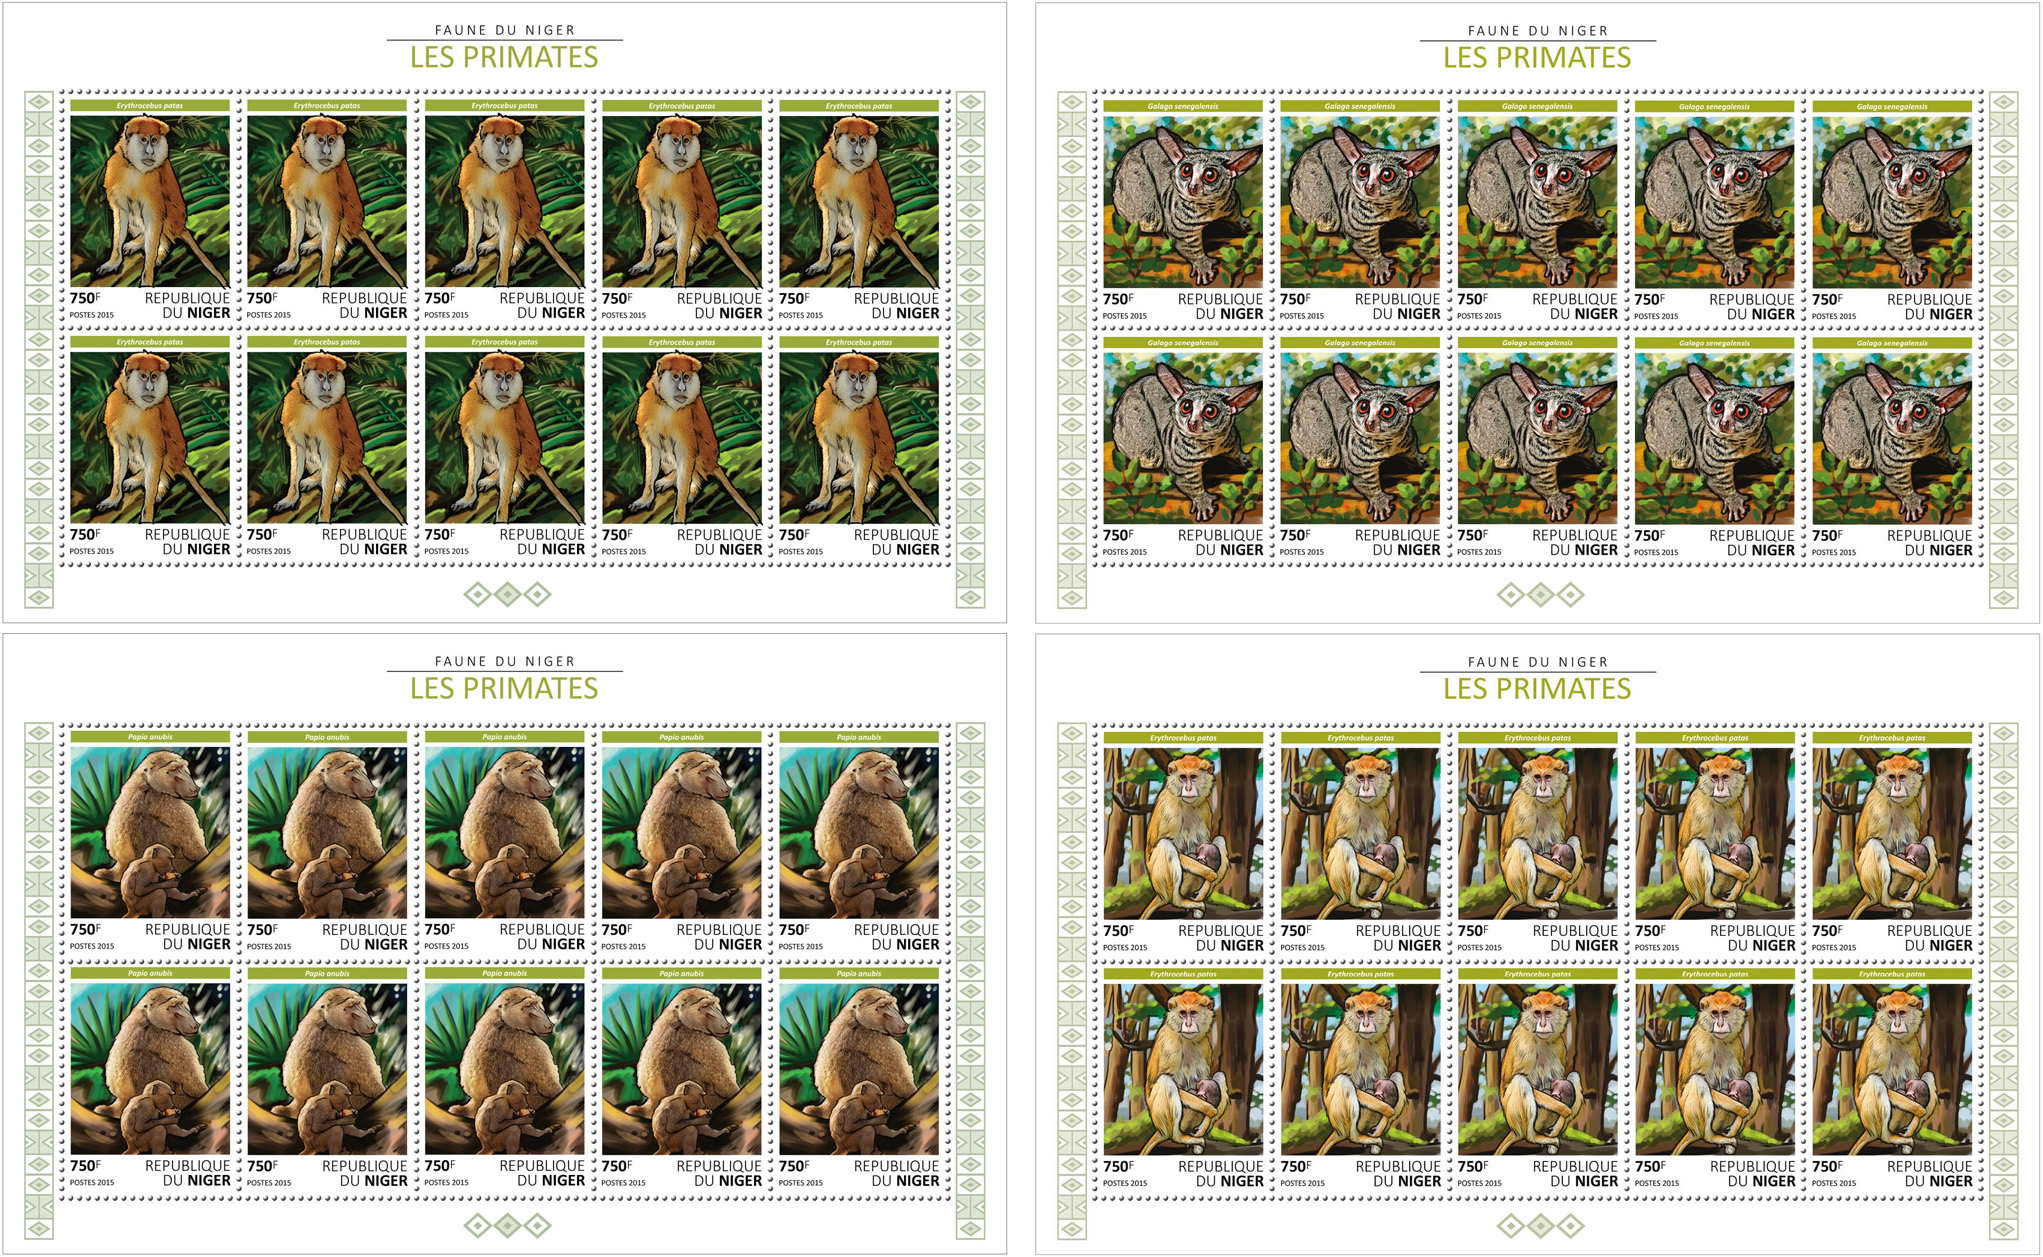 Primates 4x10v - Issue of Niger postage stamps